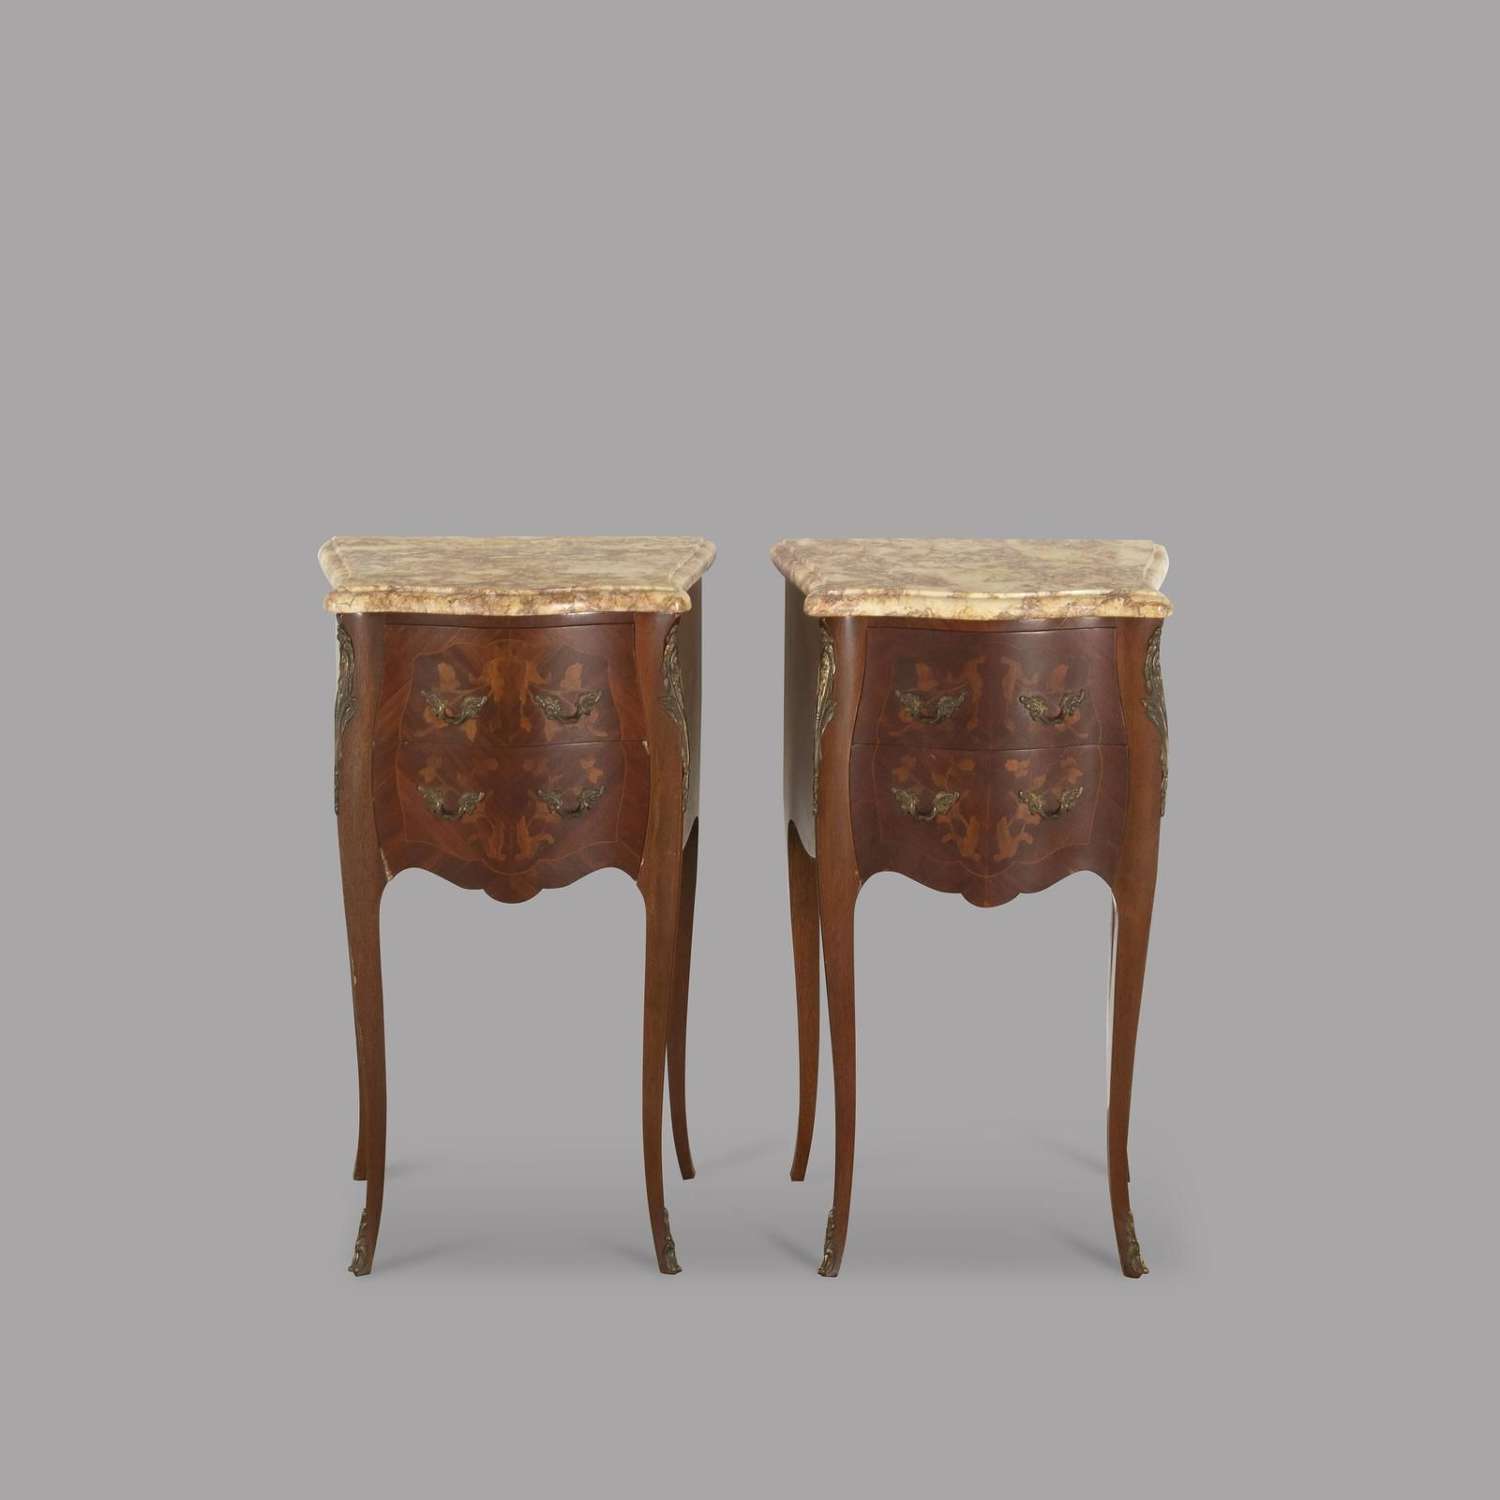 Pair of French Serpentine Side Tables with Marble Tops